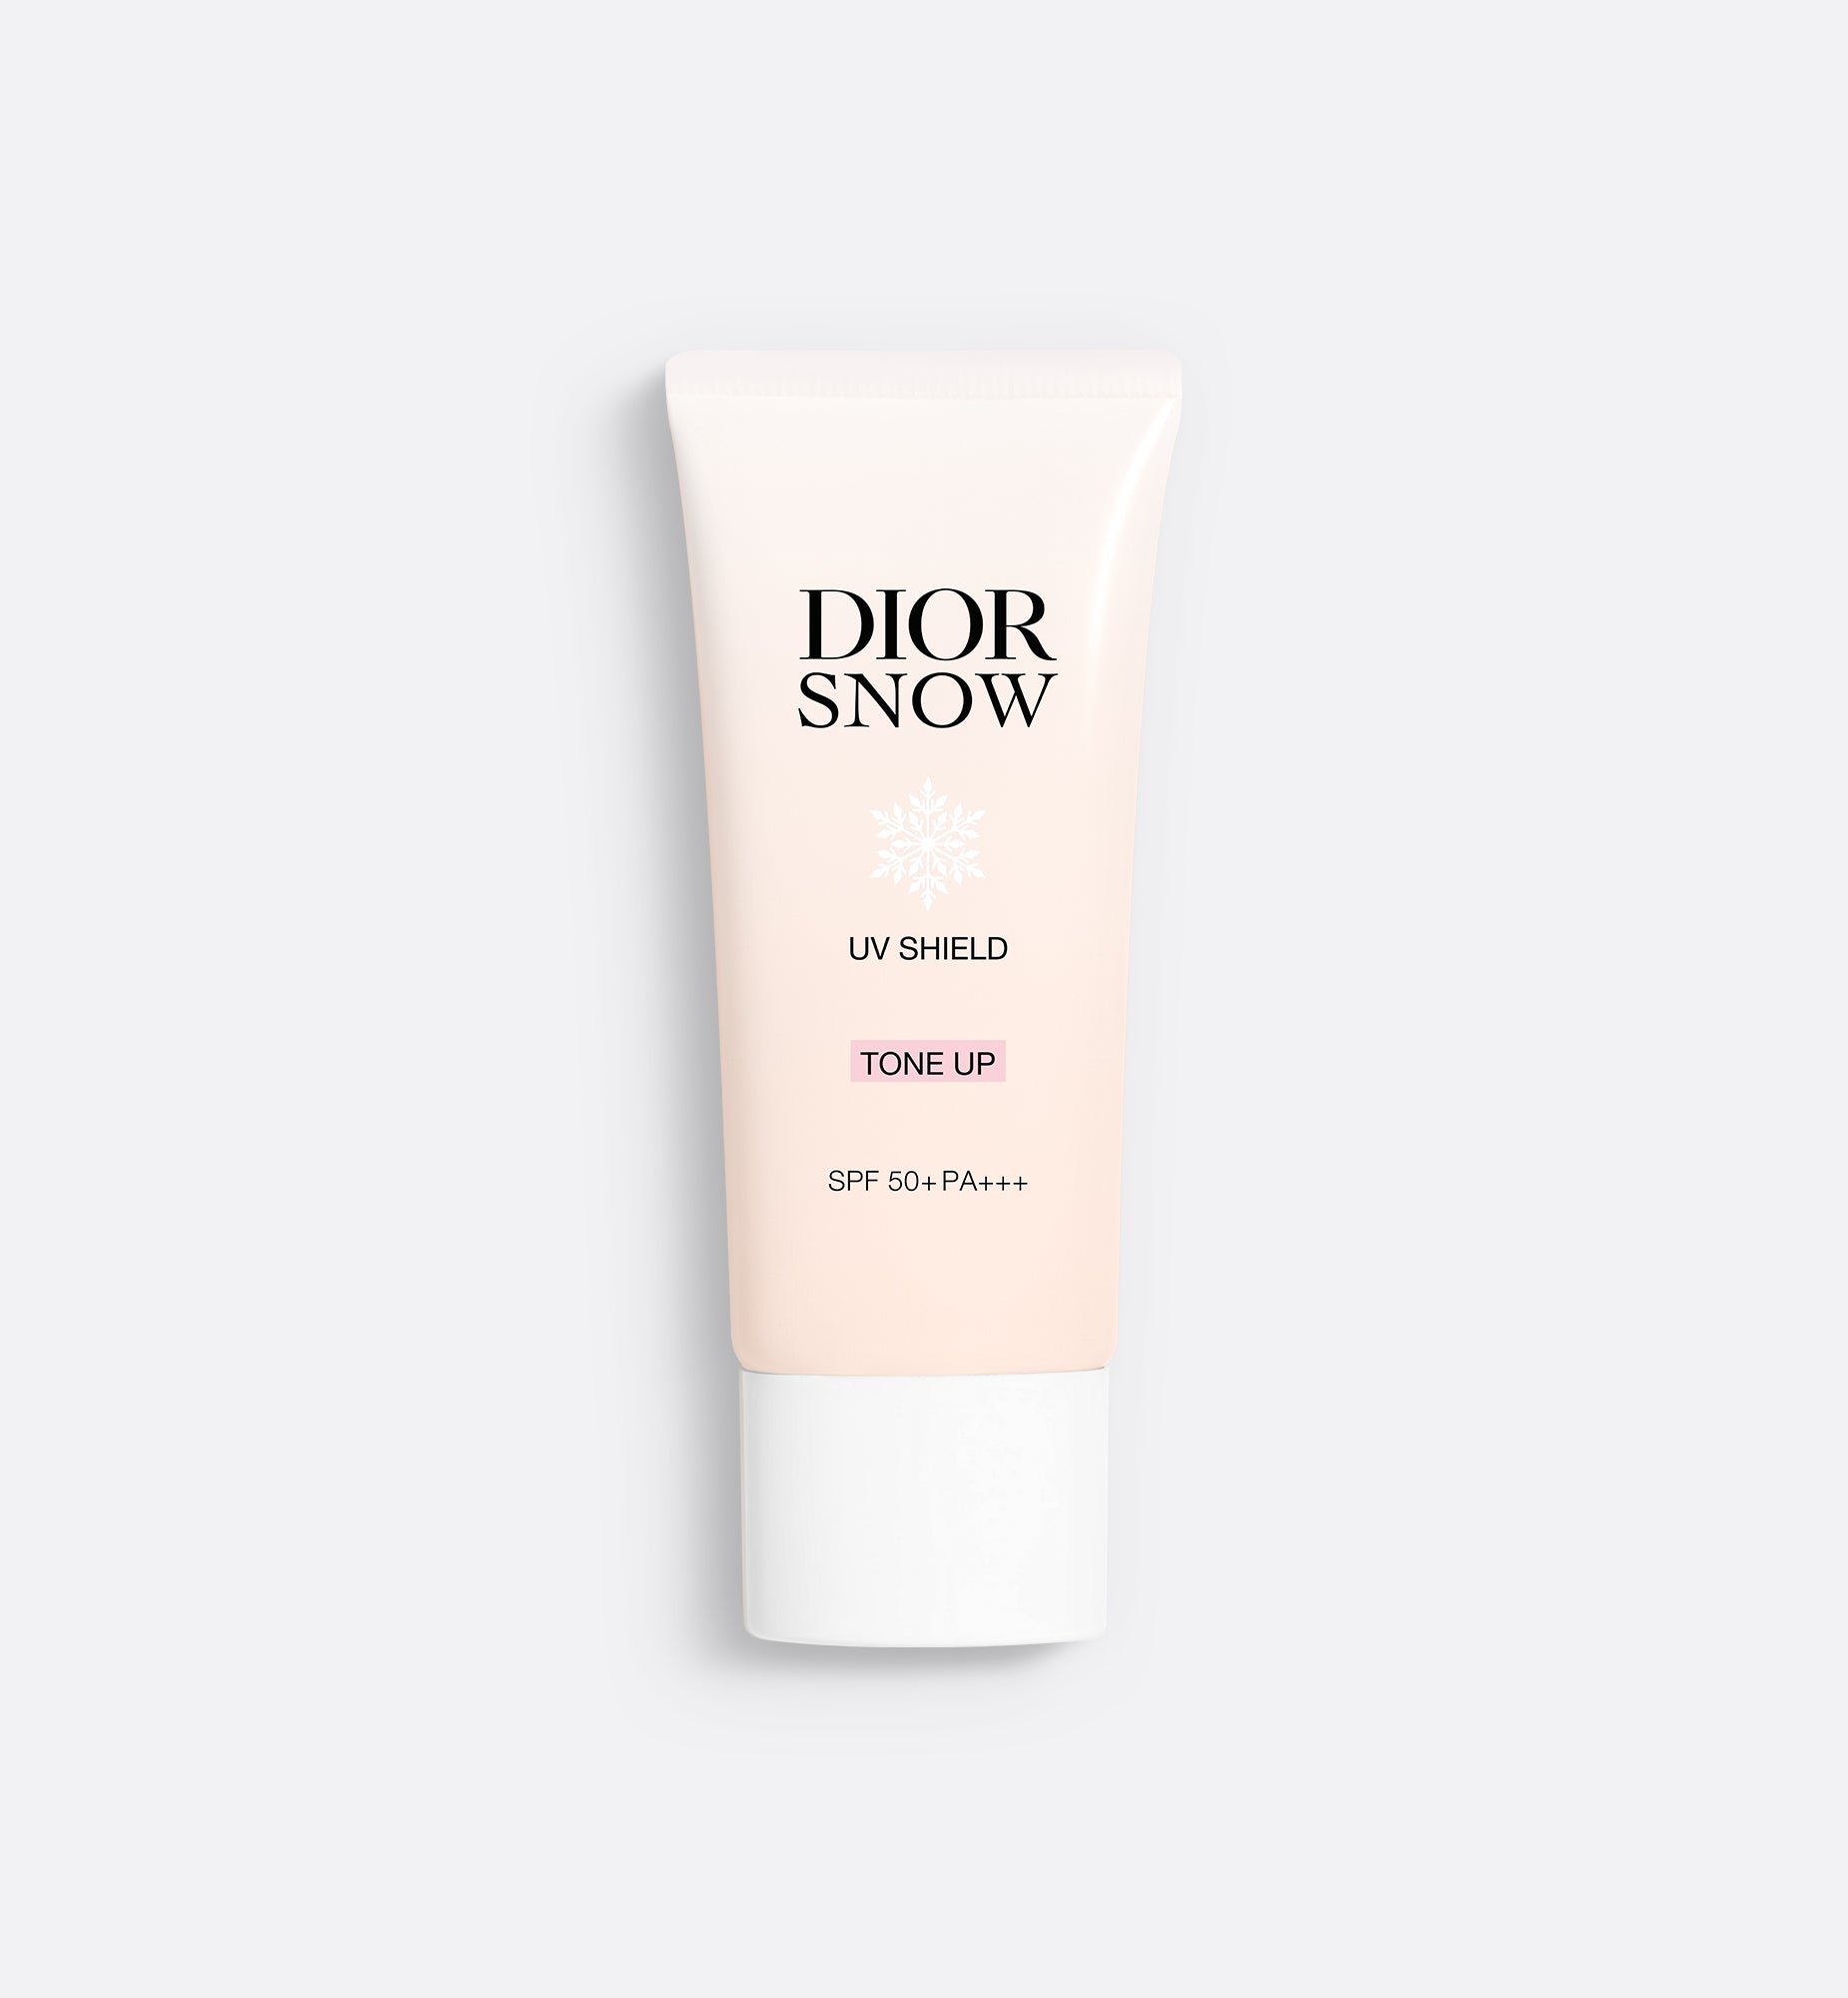 Diorsnow UV Shield Tone Up | UV Protection for Face - Tinted Skincare - SPF 50+ PA+++